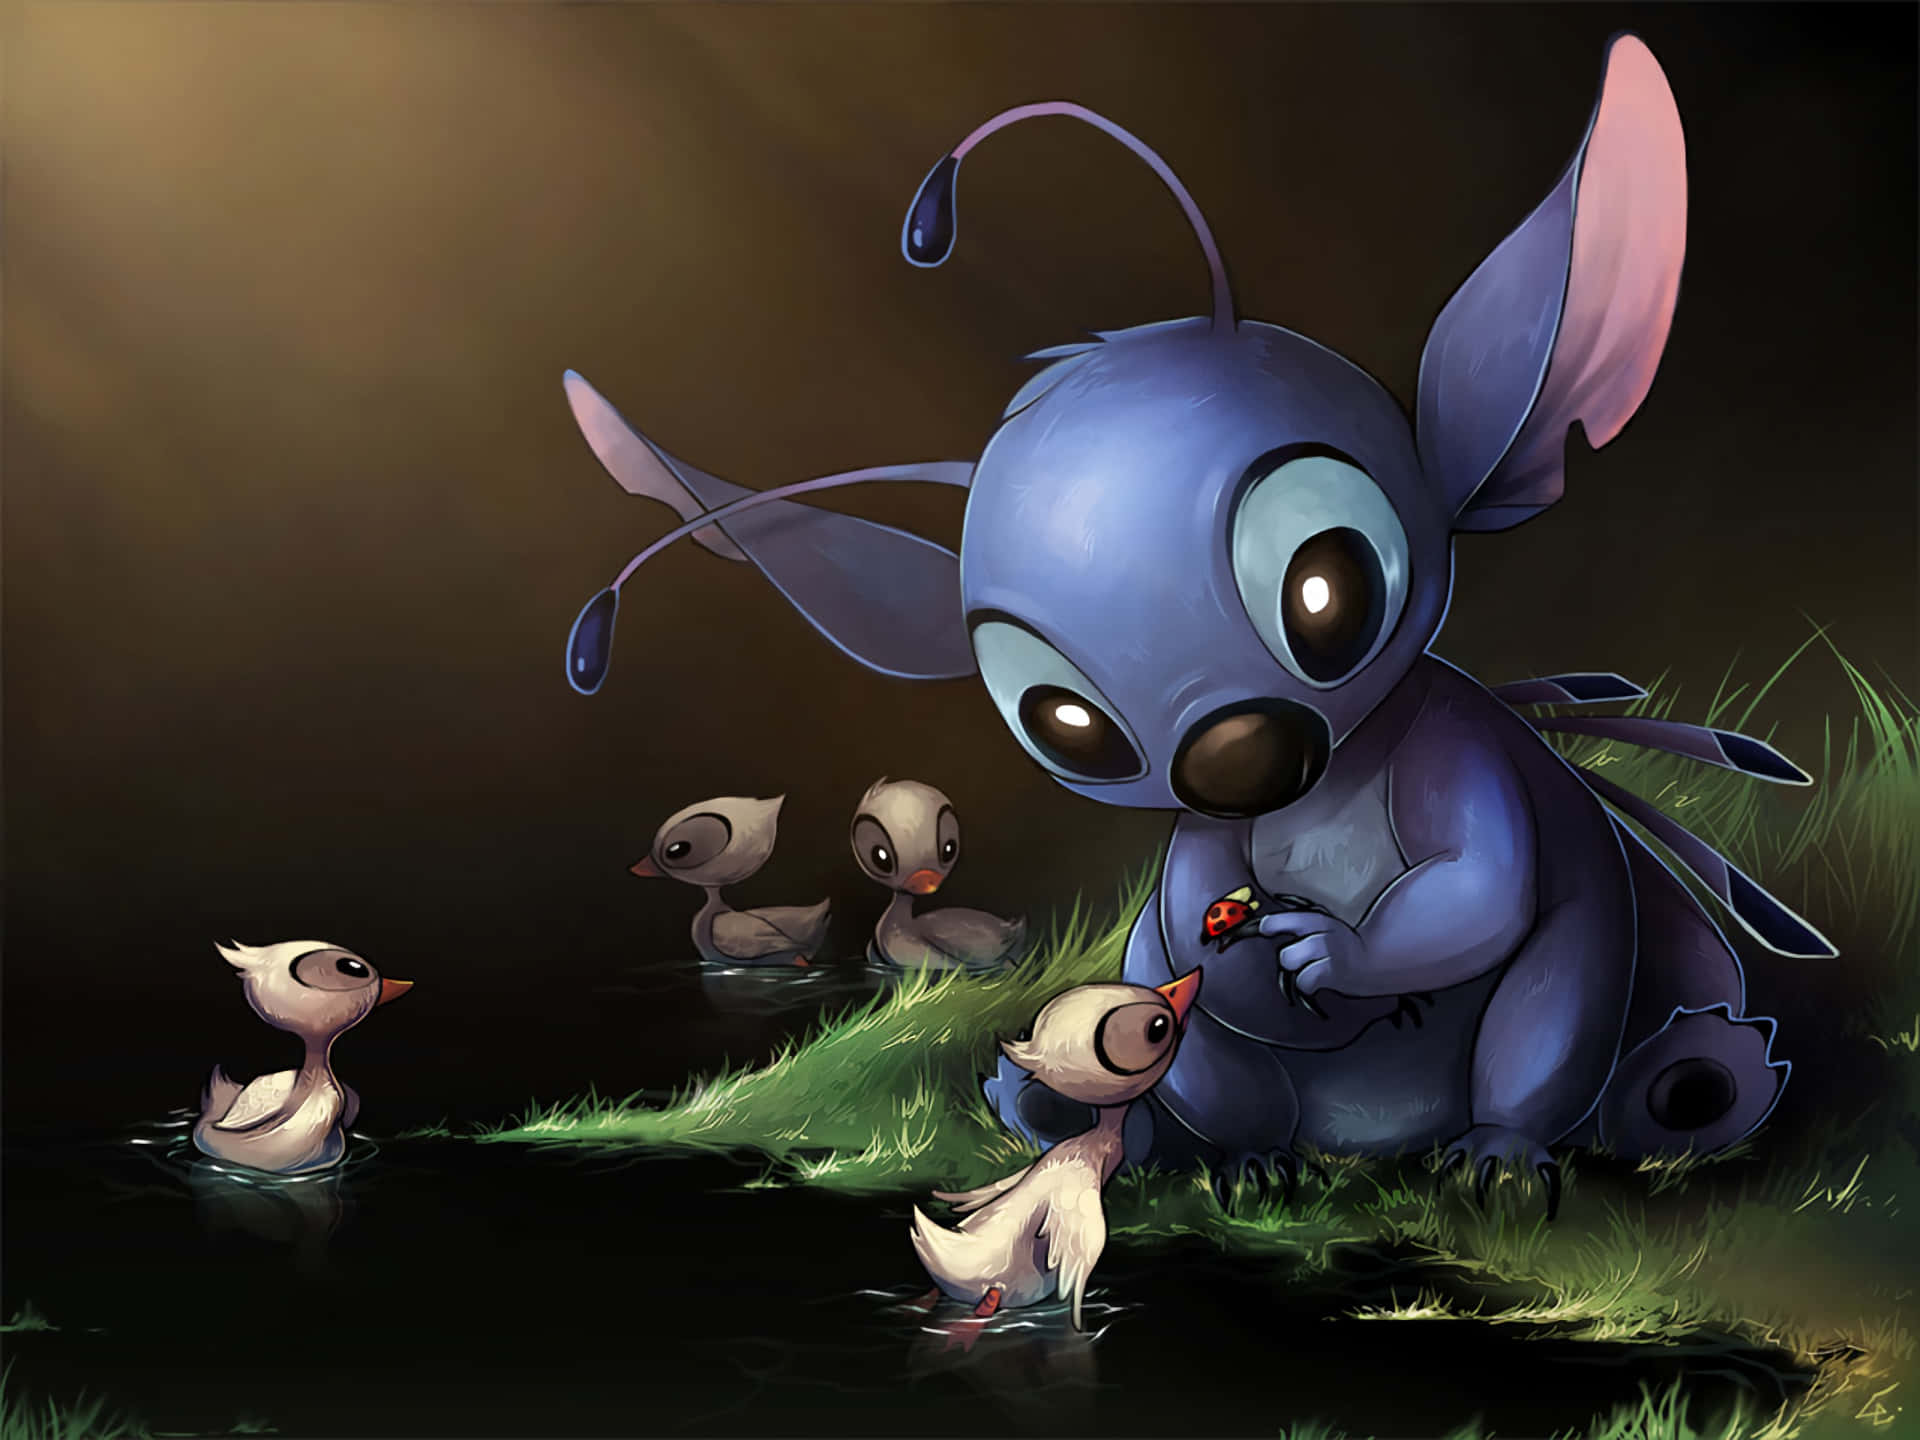 "galactic Adventurer, Stitch In Action"